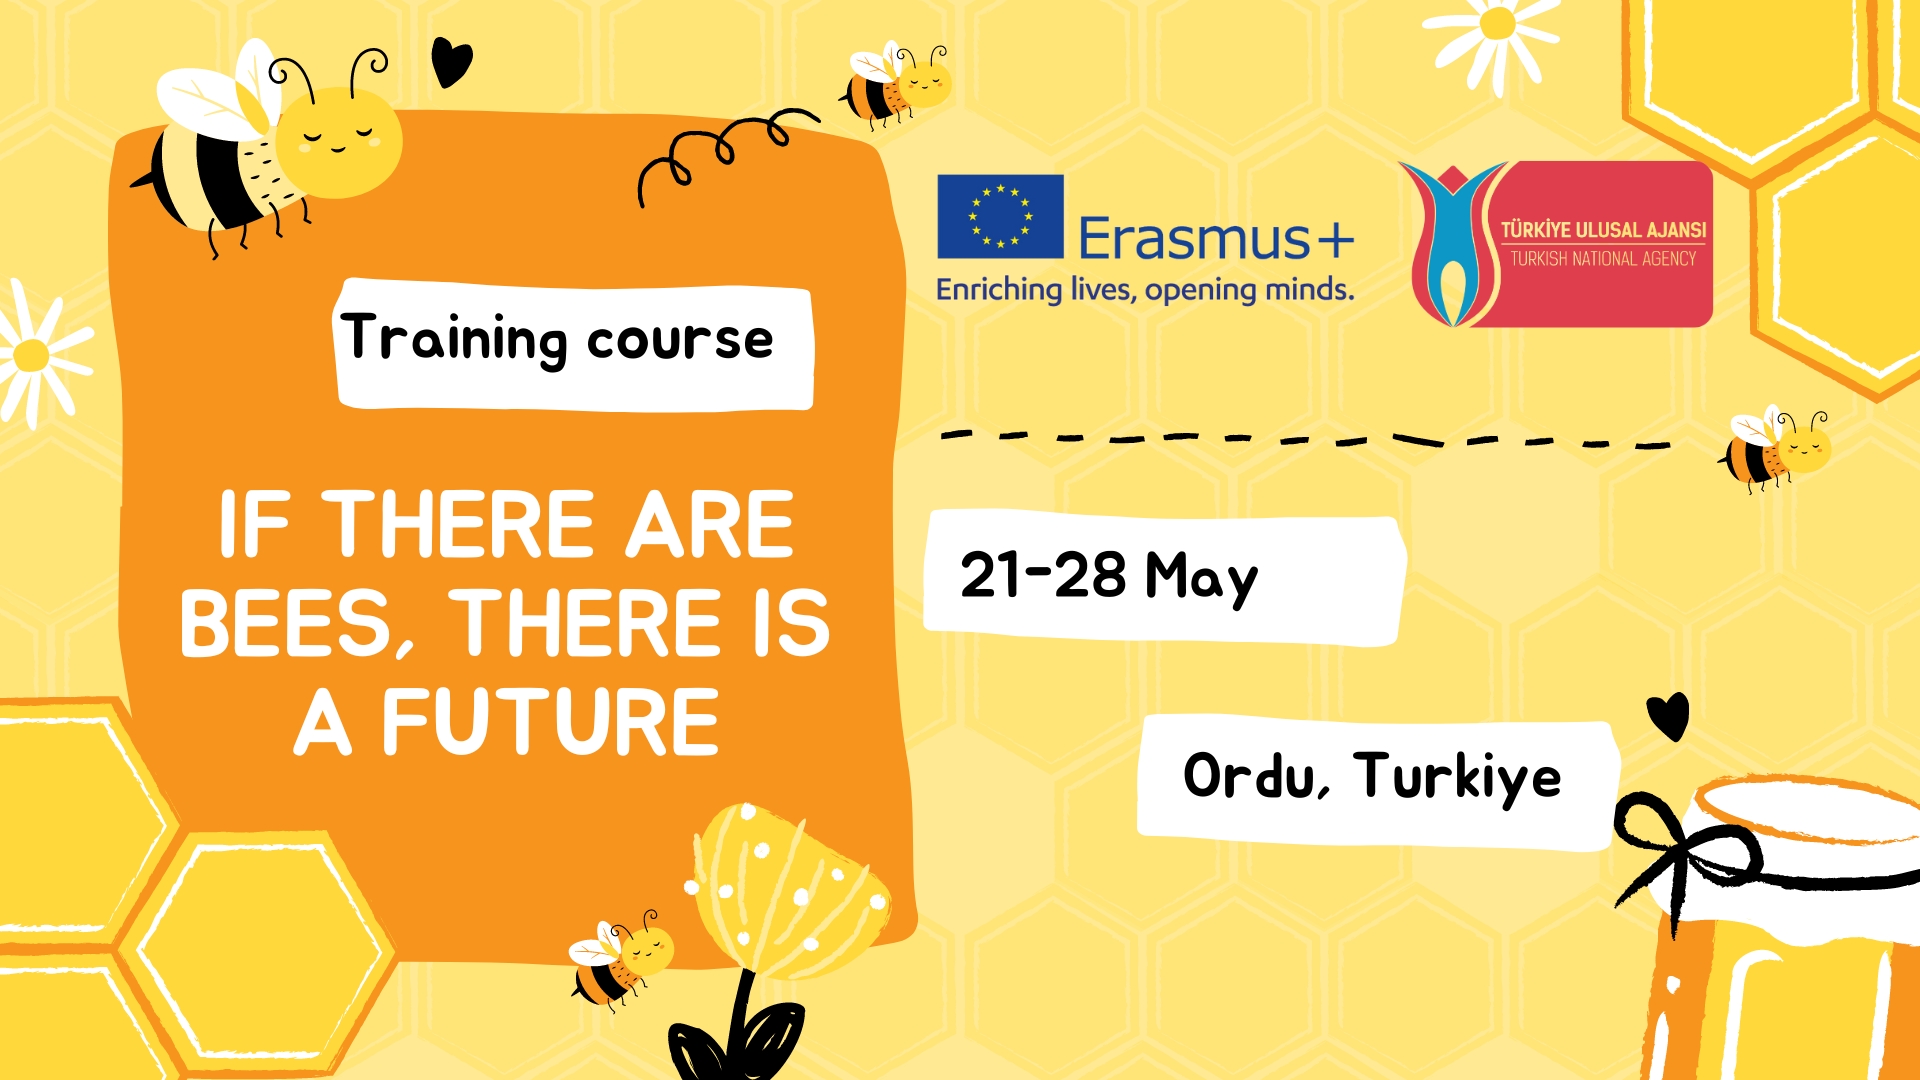 Erasmus+ Training course "If there are bees, there is a future!" in Ordu, Turkiye